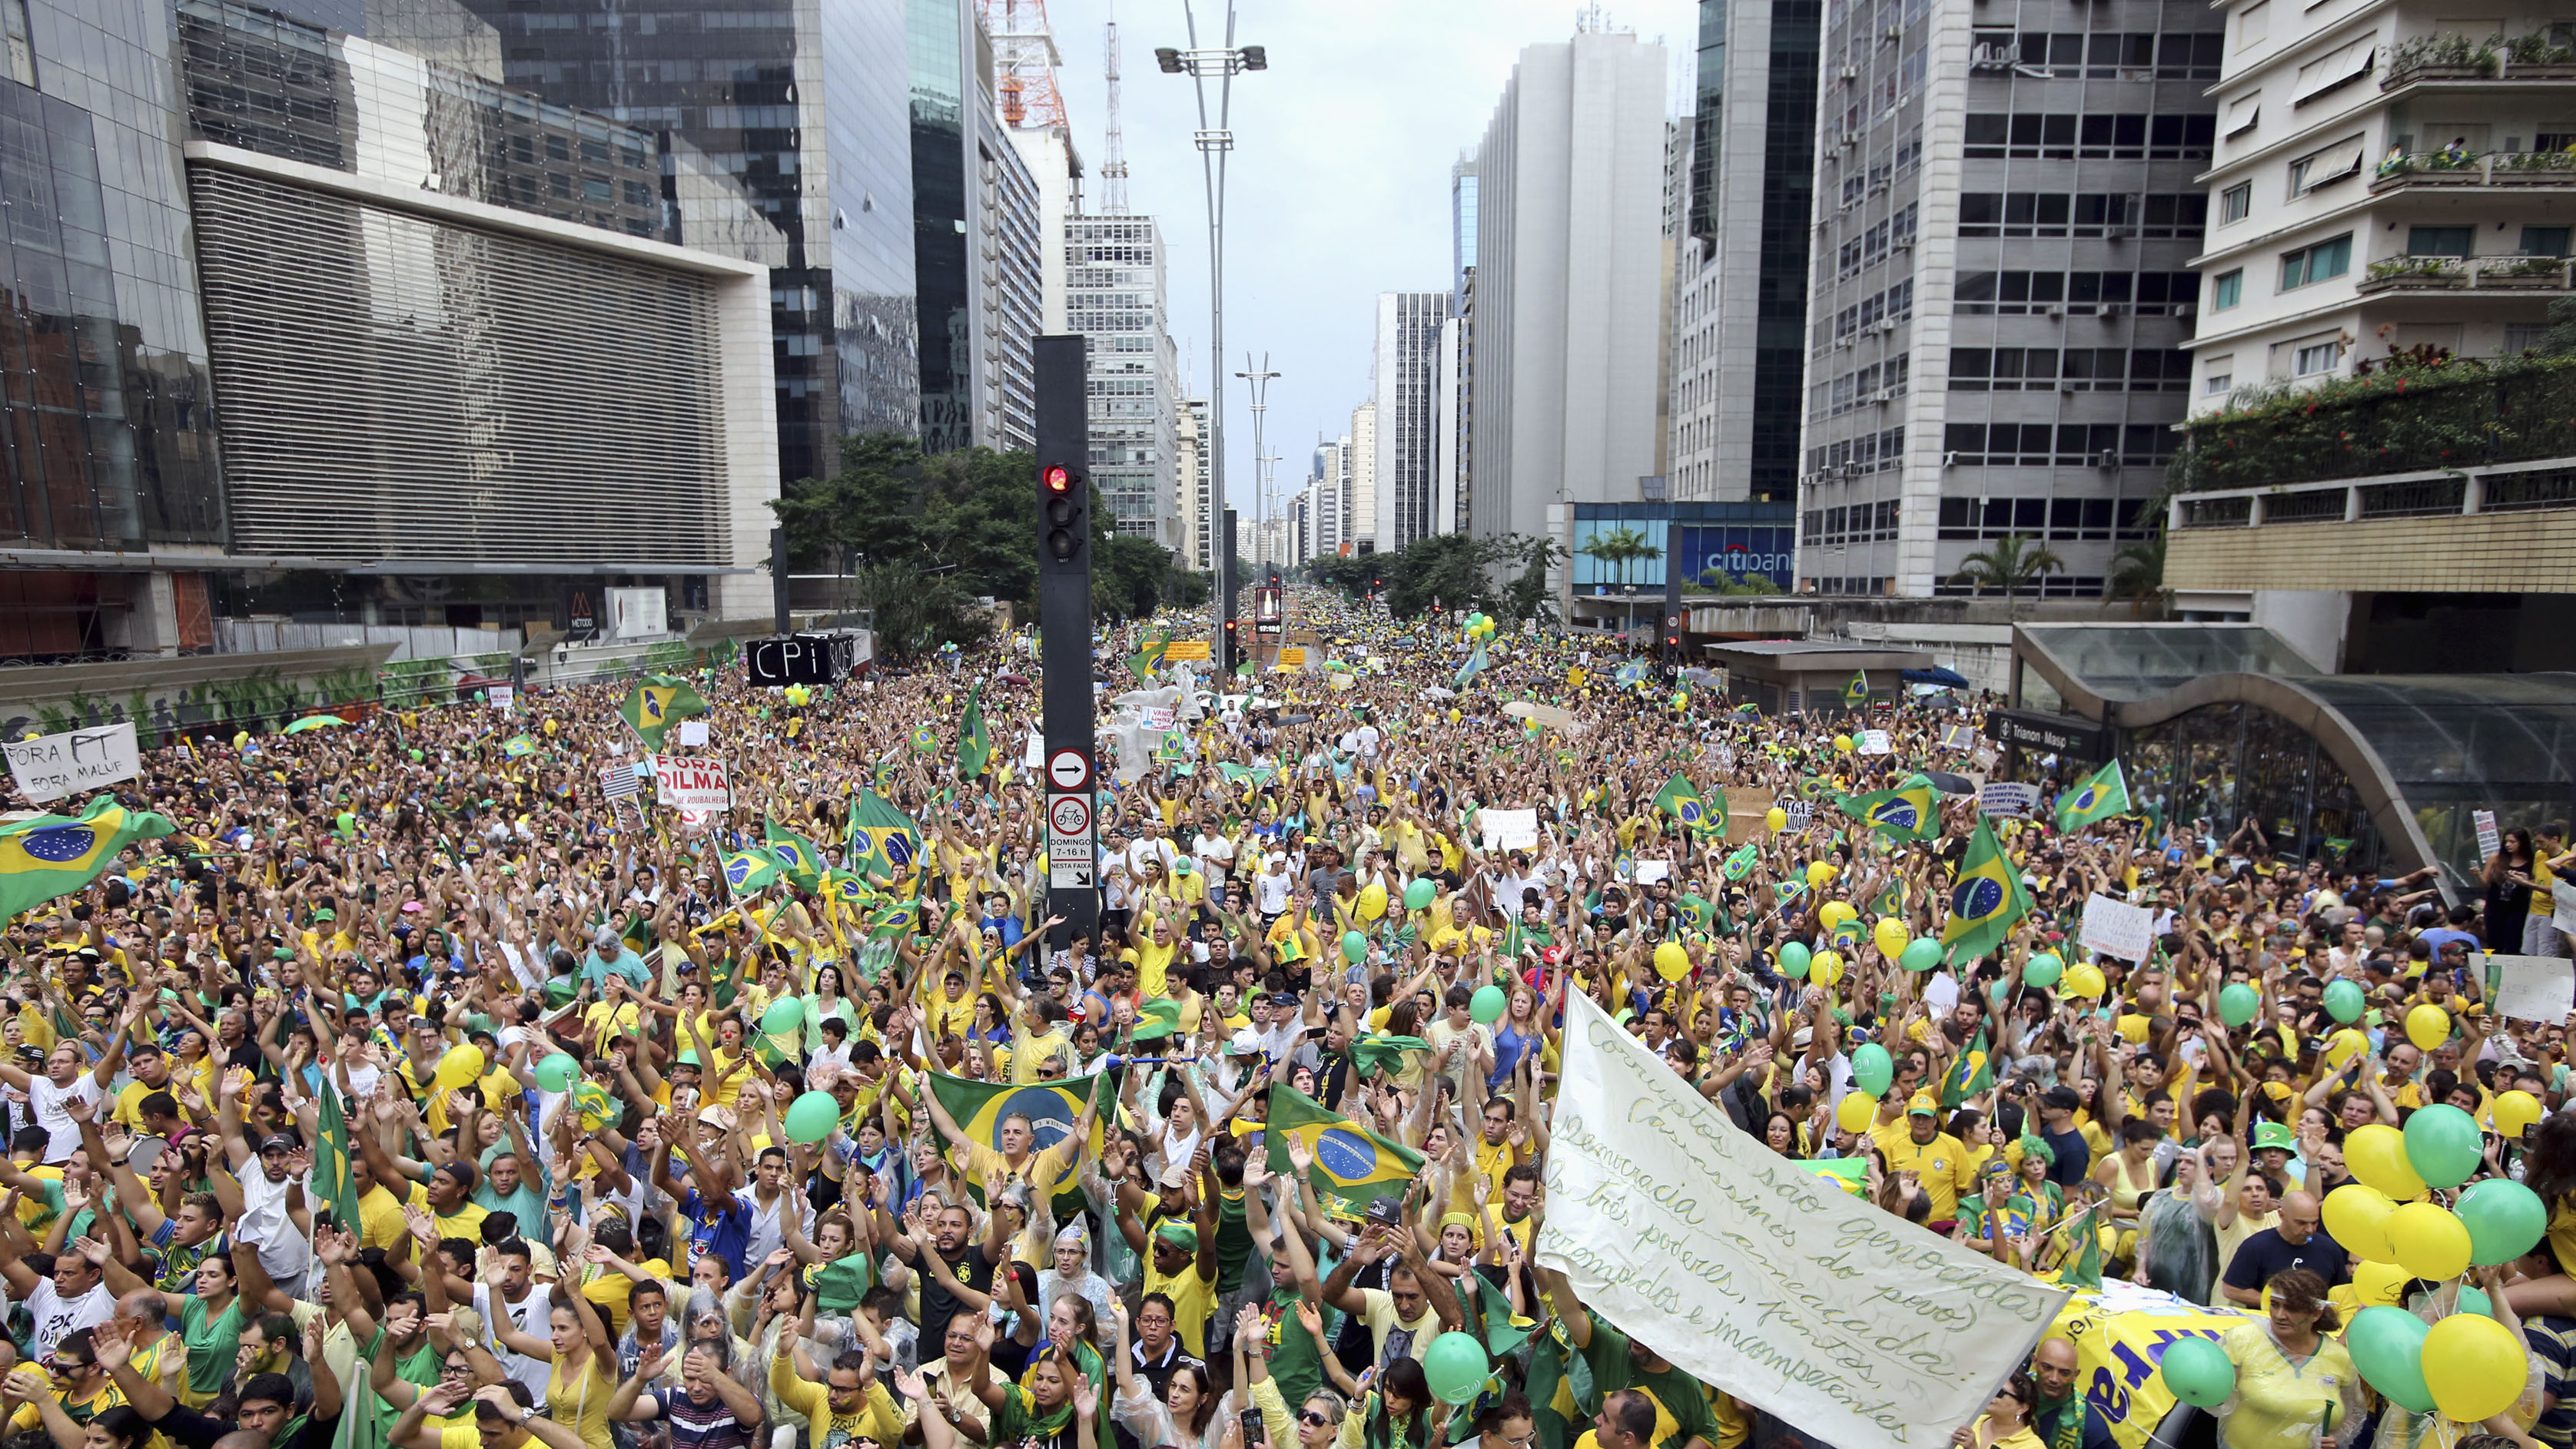 Demonstrators attend a protest against Brazil's President Dilma Rousseff at Paulista avenue in Sao Paulo March 15, 2015. Protest organizers in dozens of cities across Brazil are planning marches to pressure Rousseff over unpopular budget cuts and a corruption scandal that has snared leaders of her political coalition. REUTERS/Paulo Whitaker (BRAZIL - Tags: POLITICS CIVIL UNREST CITYSCAPE) - RTR4TGWG